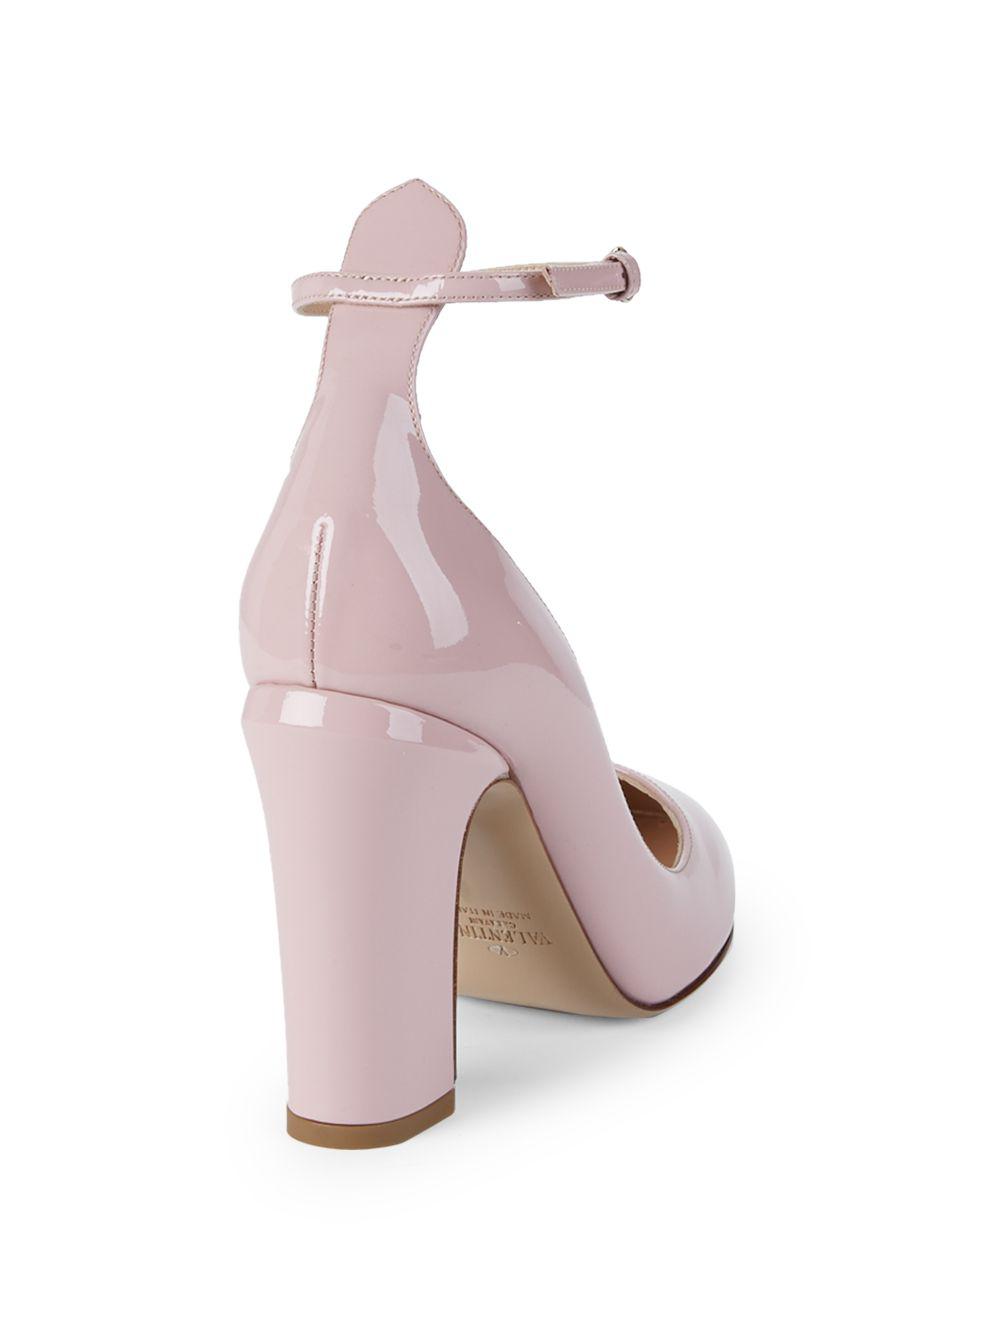 Valentino Tango Patent Leather Pumps in Light Pink (Pink) - Lyst